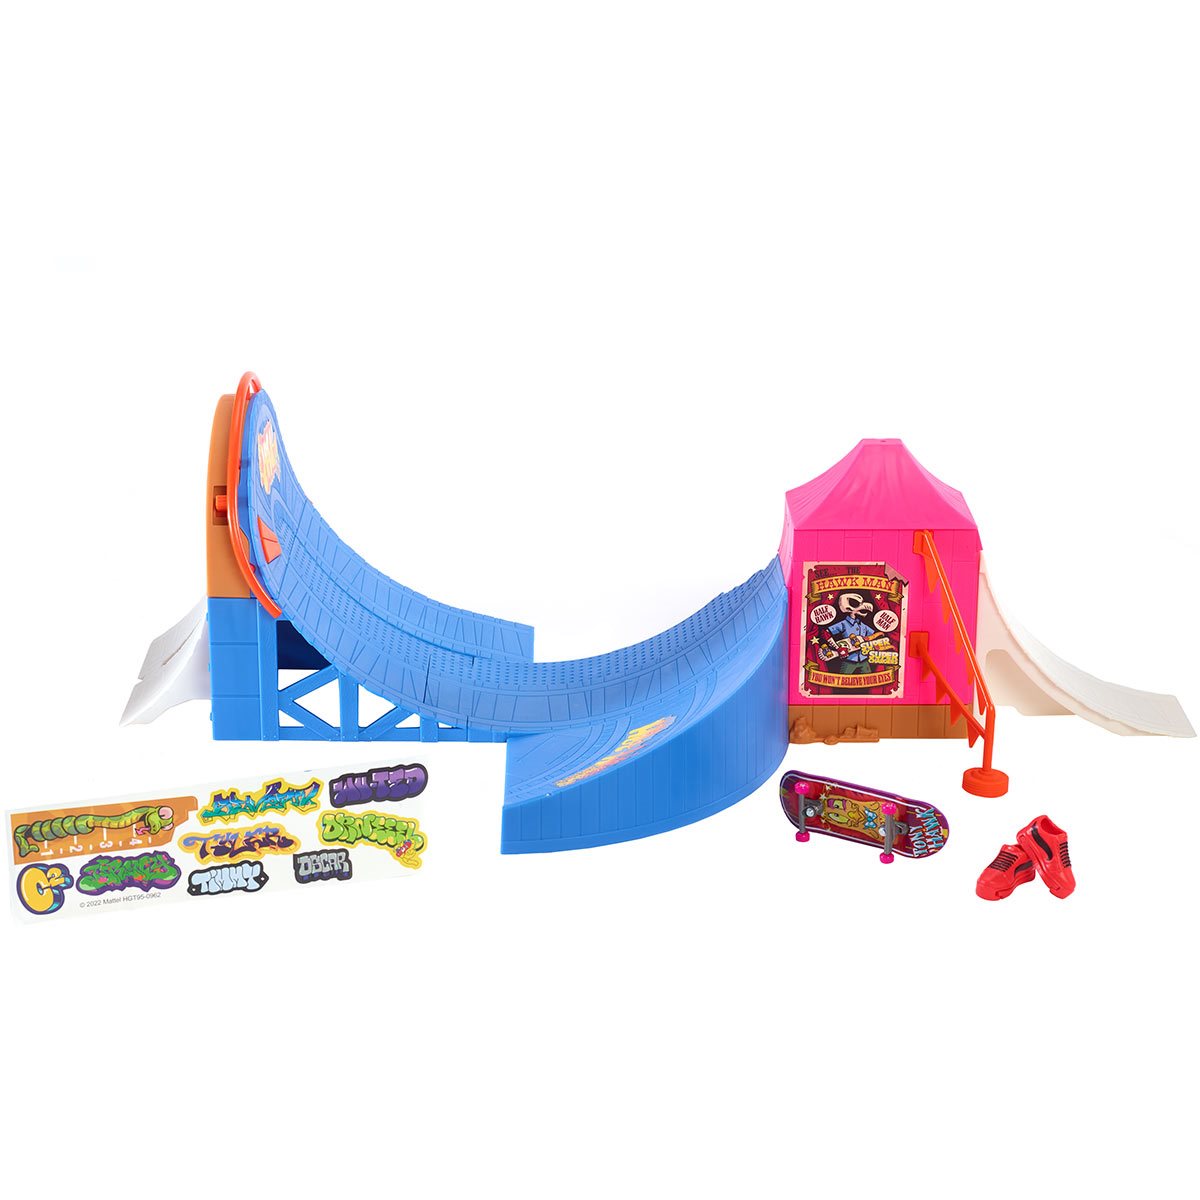 Hot Wheels Skate Aquarium Skatepark Playset with Tony Hawk Fingerboard and  Pair of Removable Skate Shoes